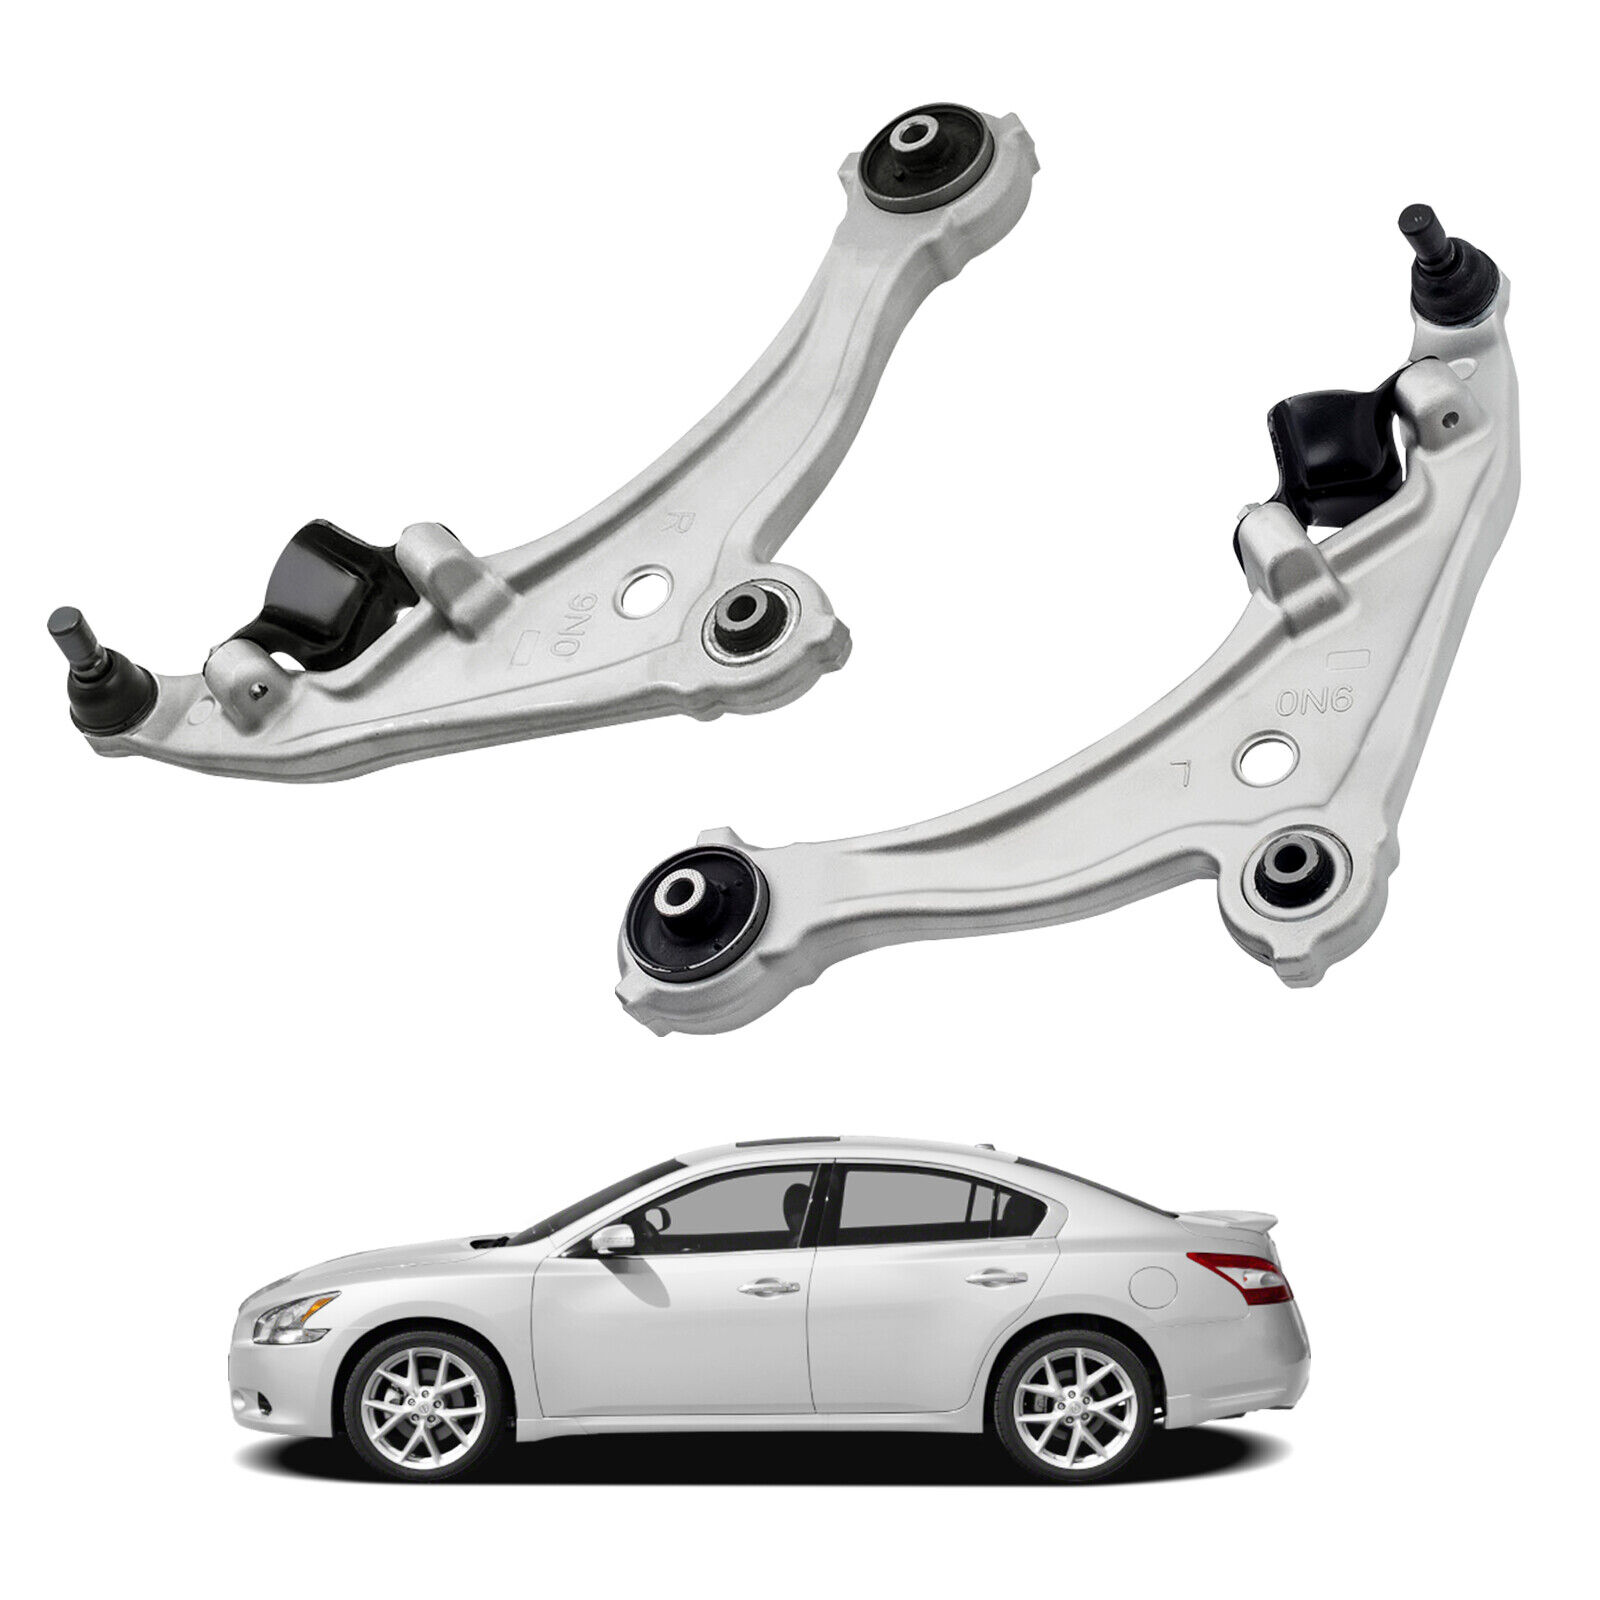 2x Front Lower Control Arms w/Ball Joint for 2009-2013 2014 Nissan Maxima 4 Door